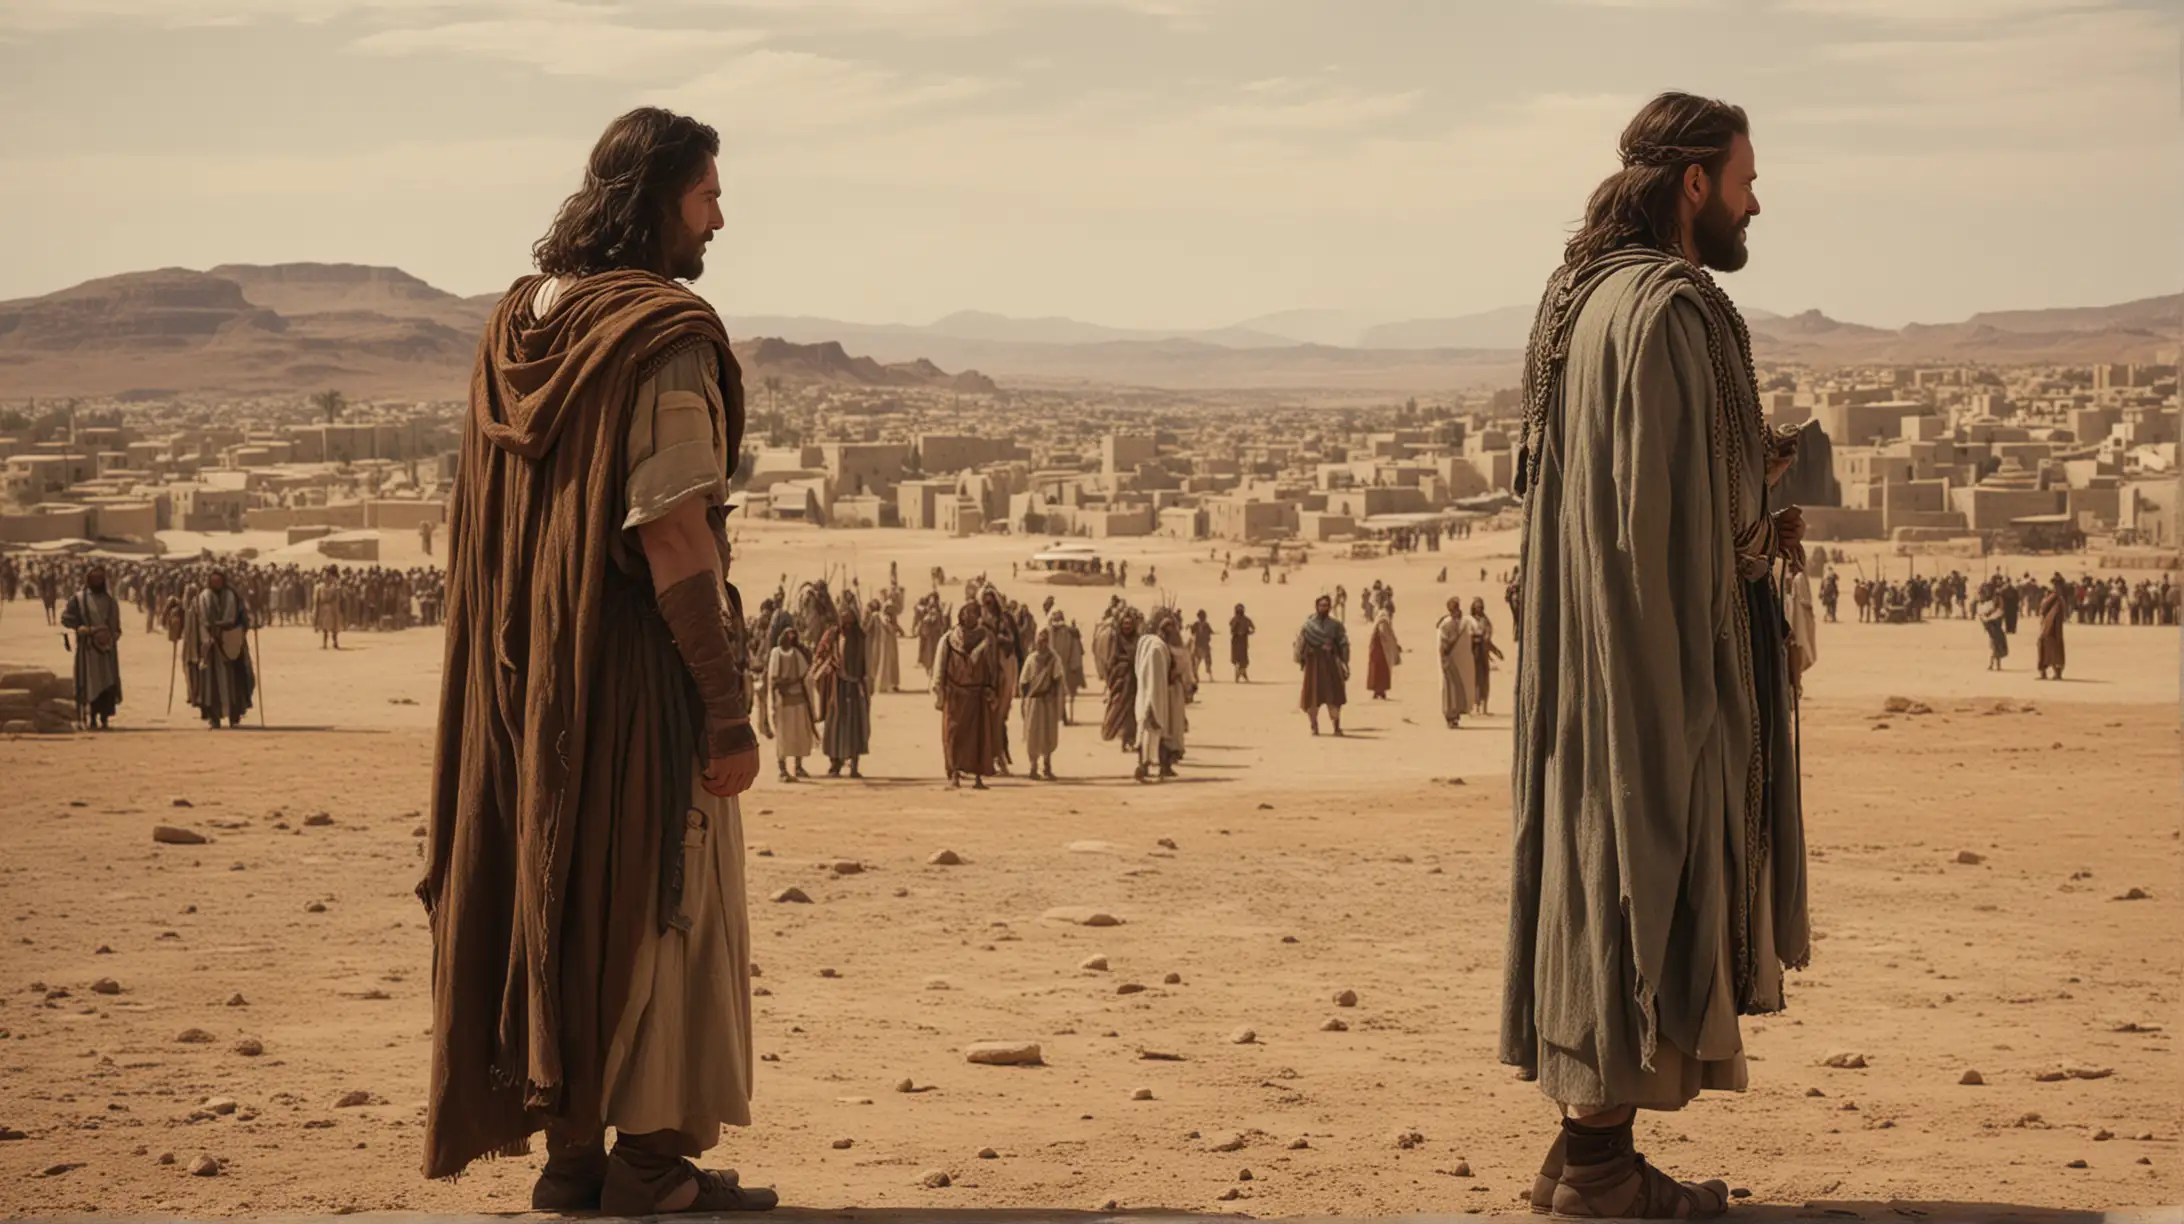 A king and a man talking in a Desert city. Some other people in the background. Set during the biblical era of Joshua.